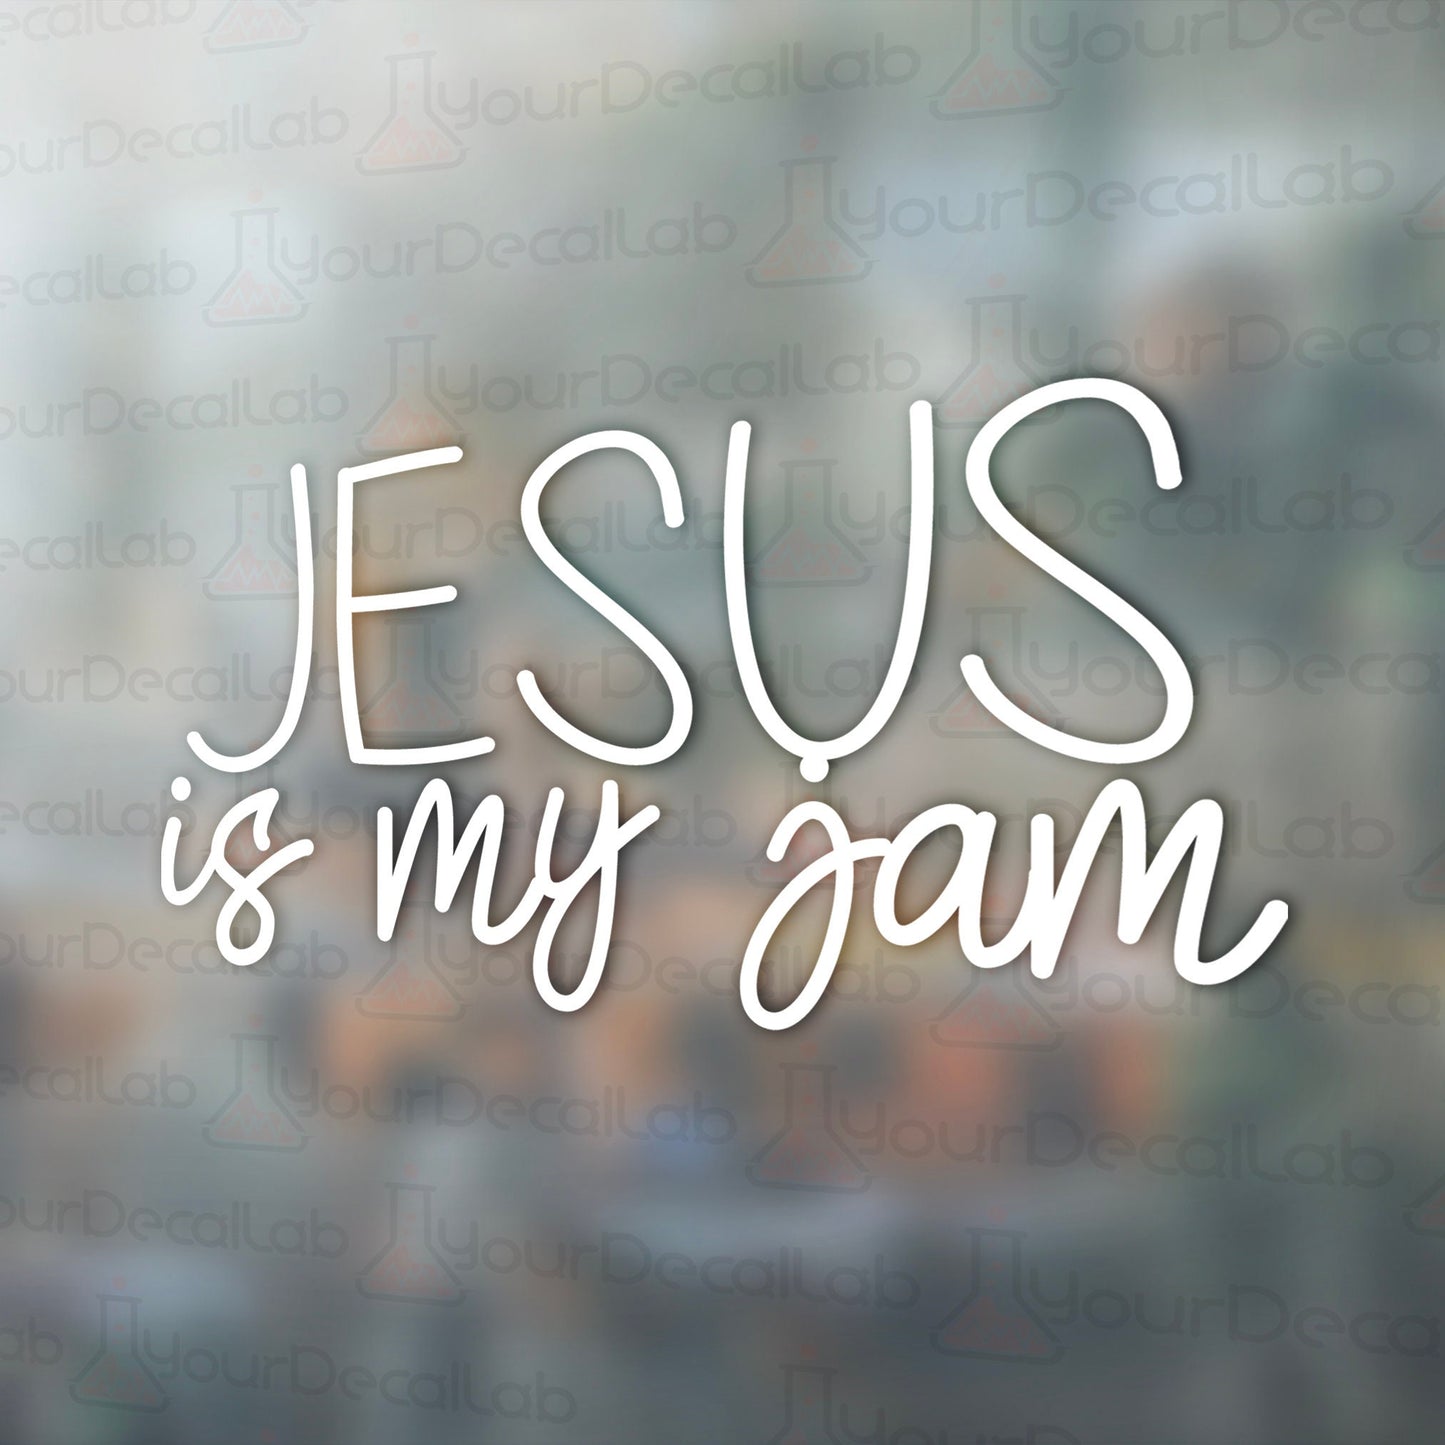 the words jesus is my jam on a blurry background